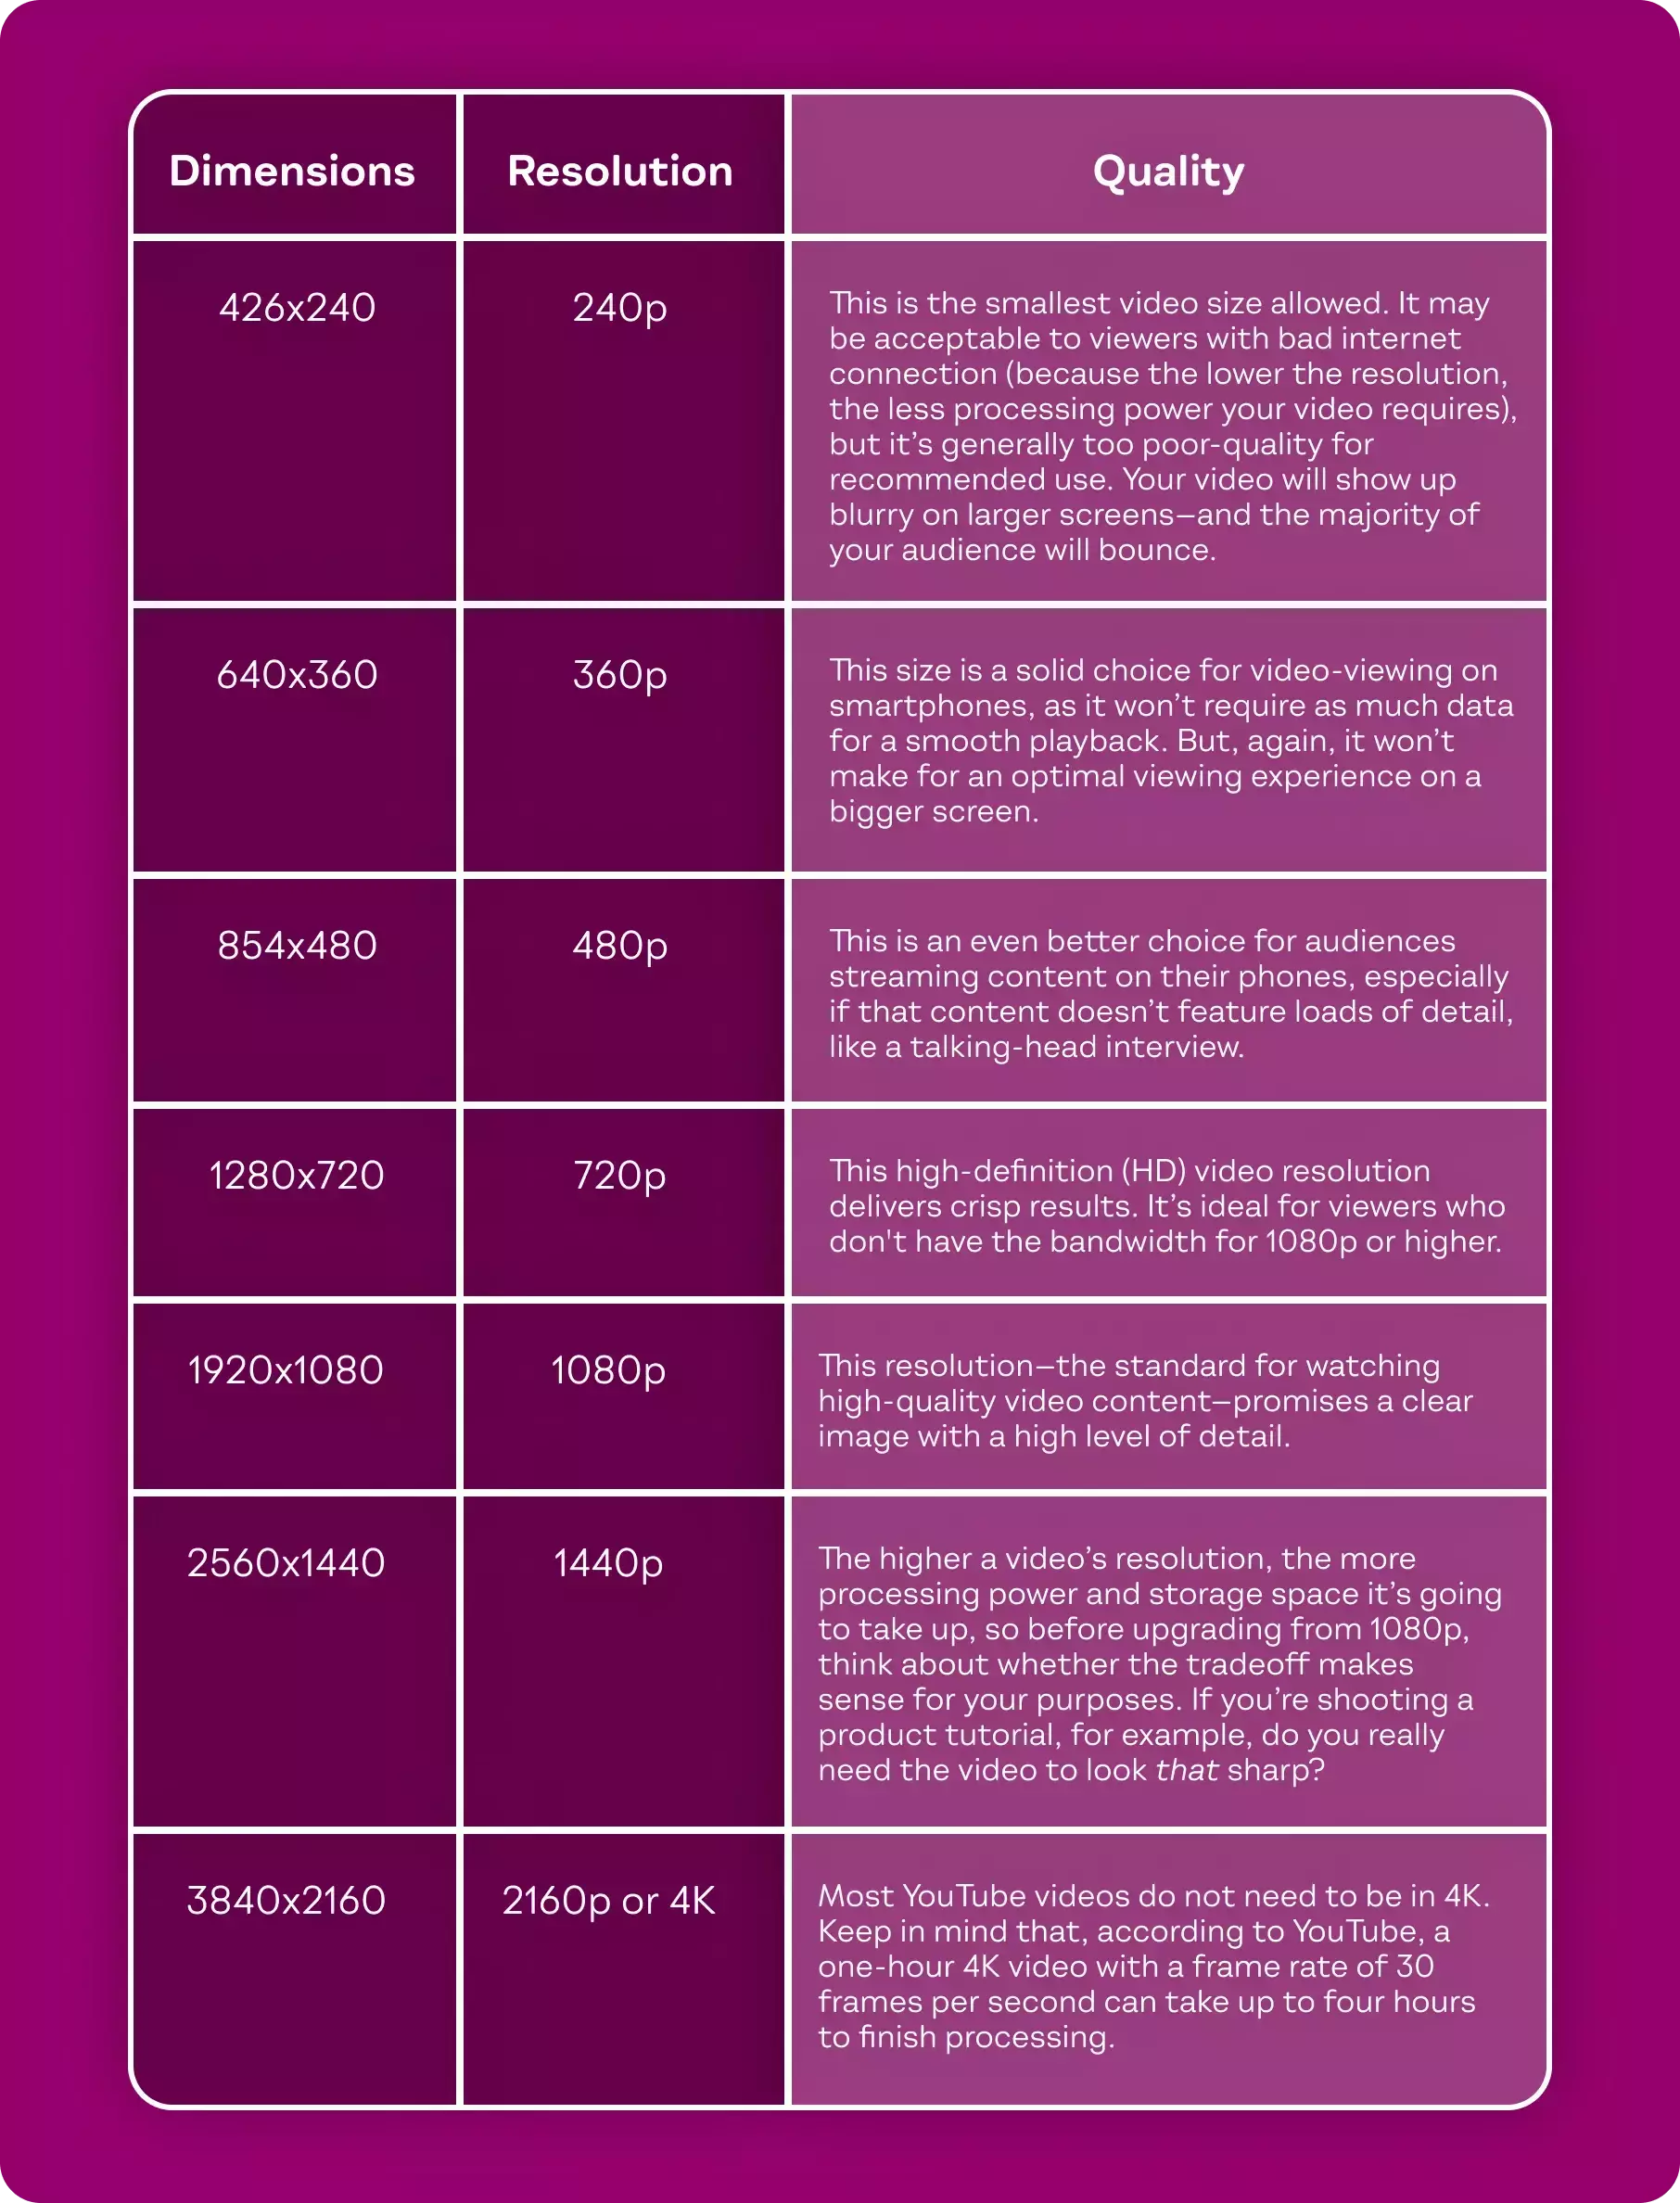 YouTube video size guide specifications listed on a magenta table